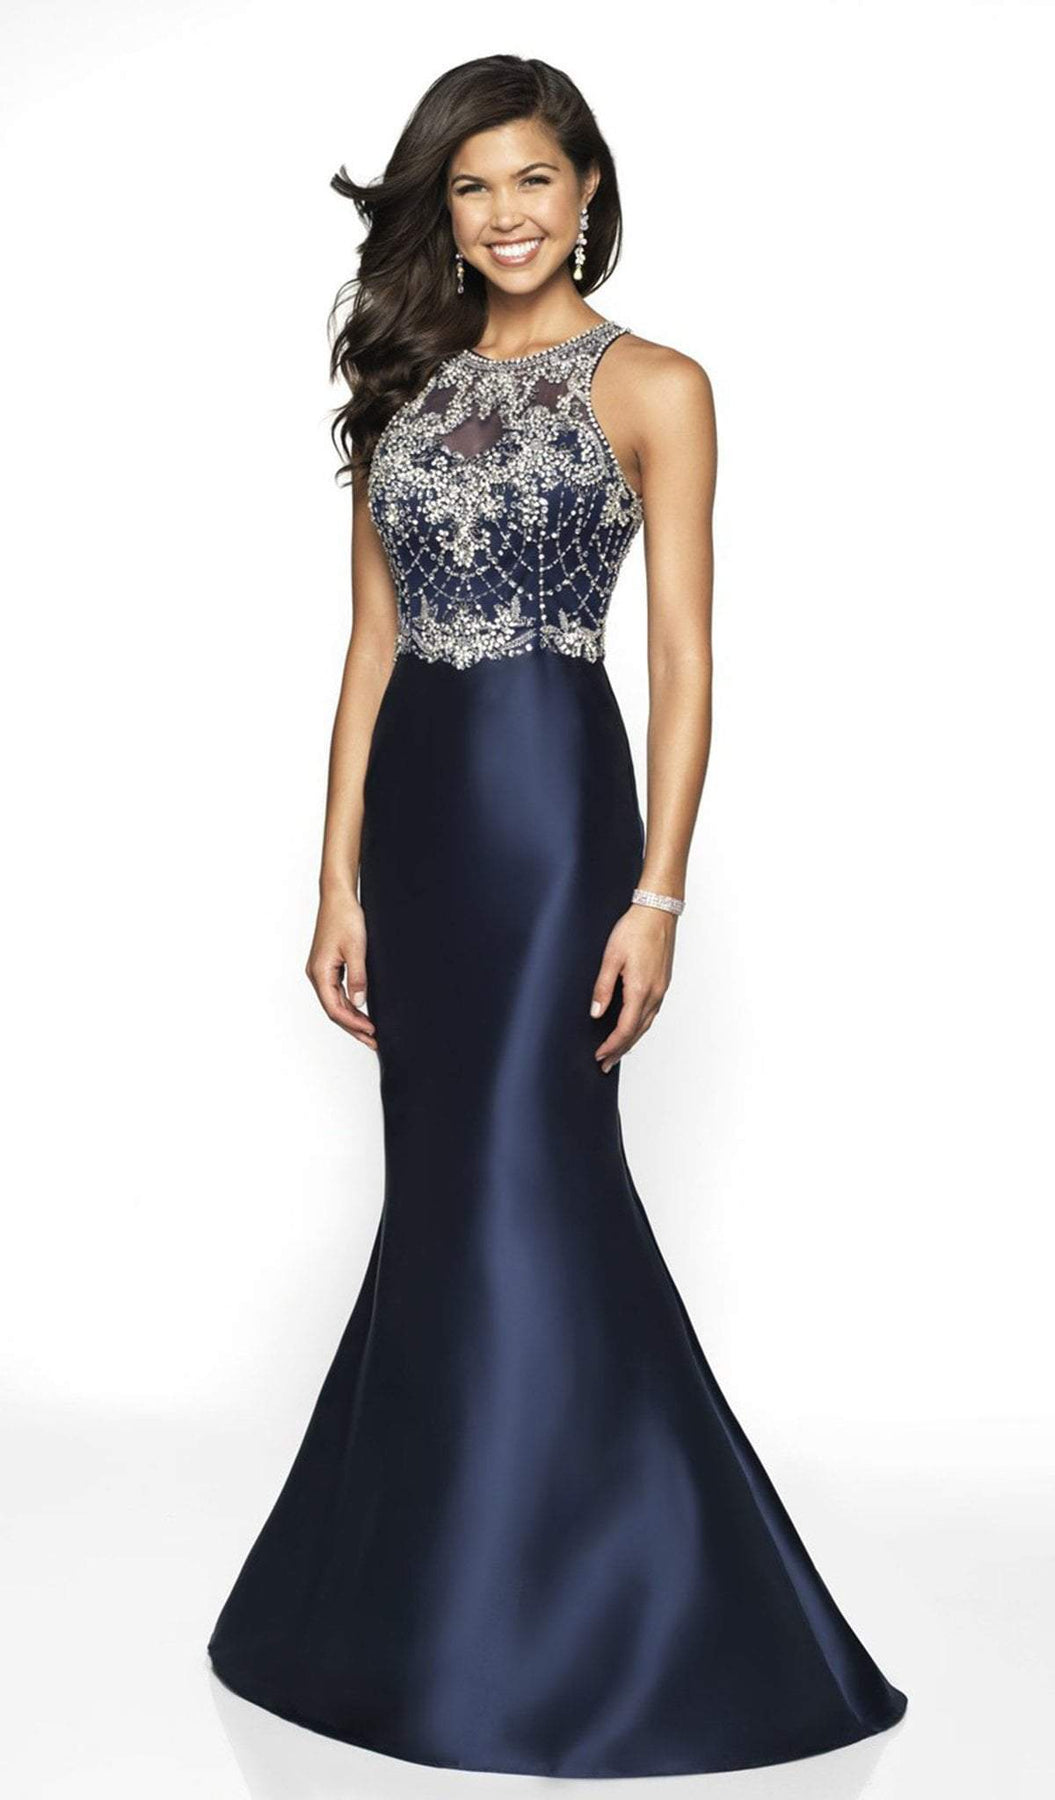 Blush by Alexia Designs - 11784 Beaded Mikado Sleeveless Trumpet Gown In Black and Blue